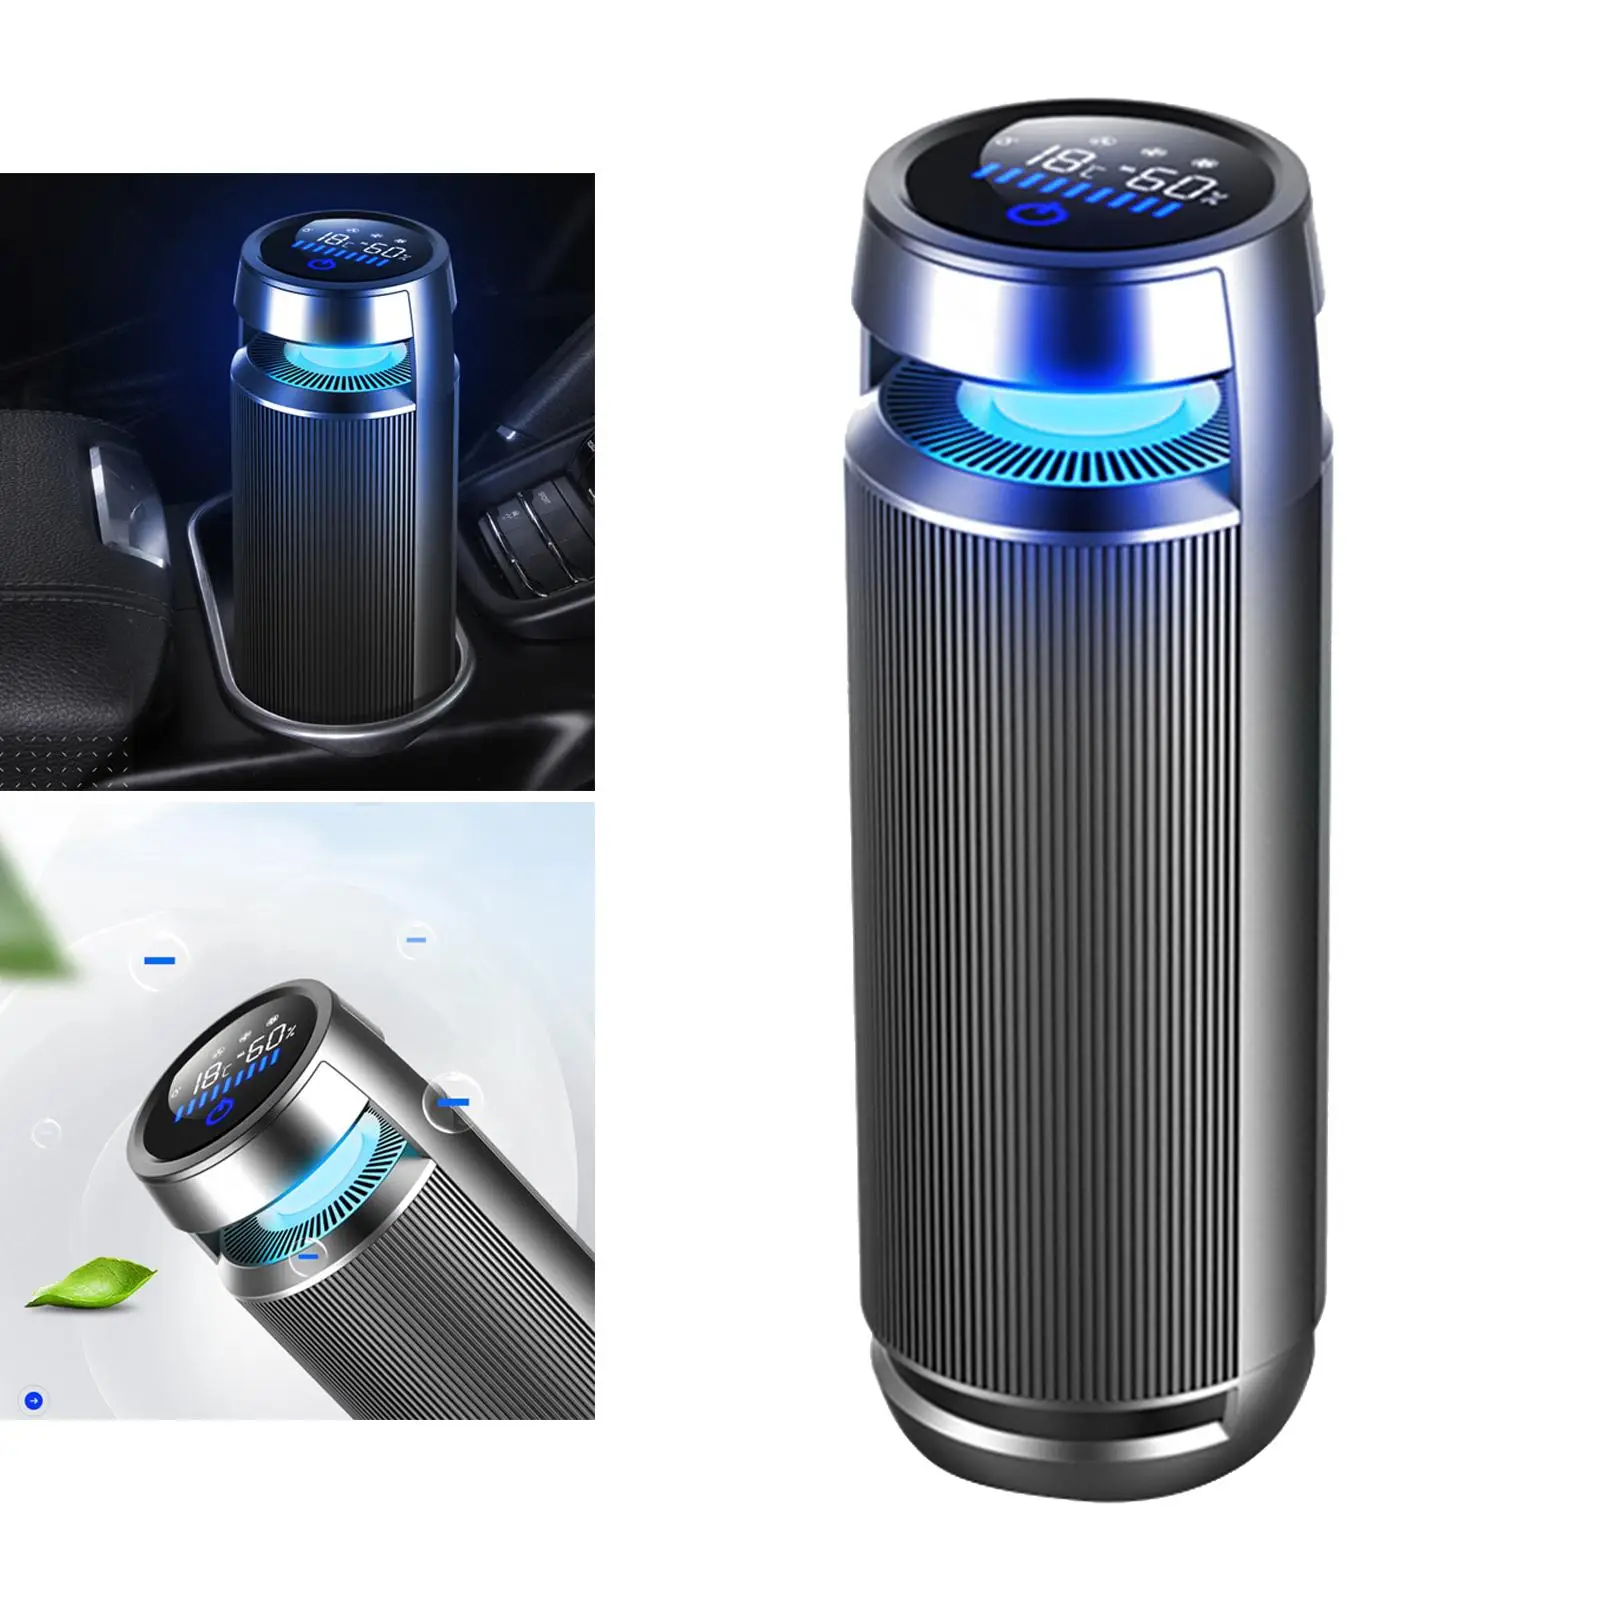 Portable   Filter, Fresh , Purifying Support for Home, Office, Car, or Travel, Removes Pollen, Smoke, Odors, USB Powered